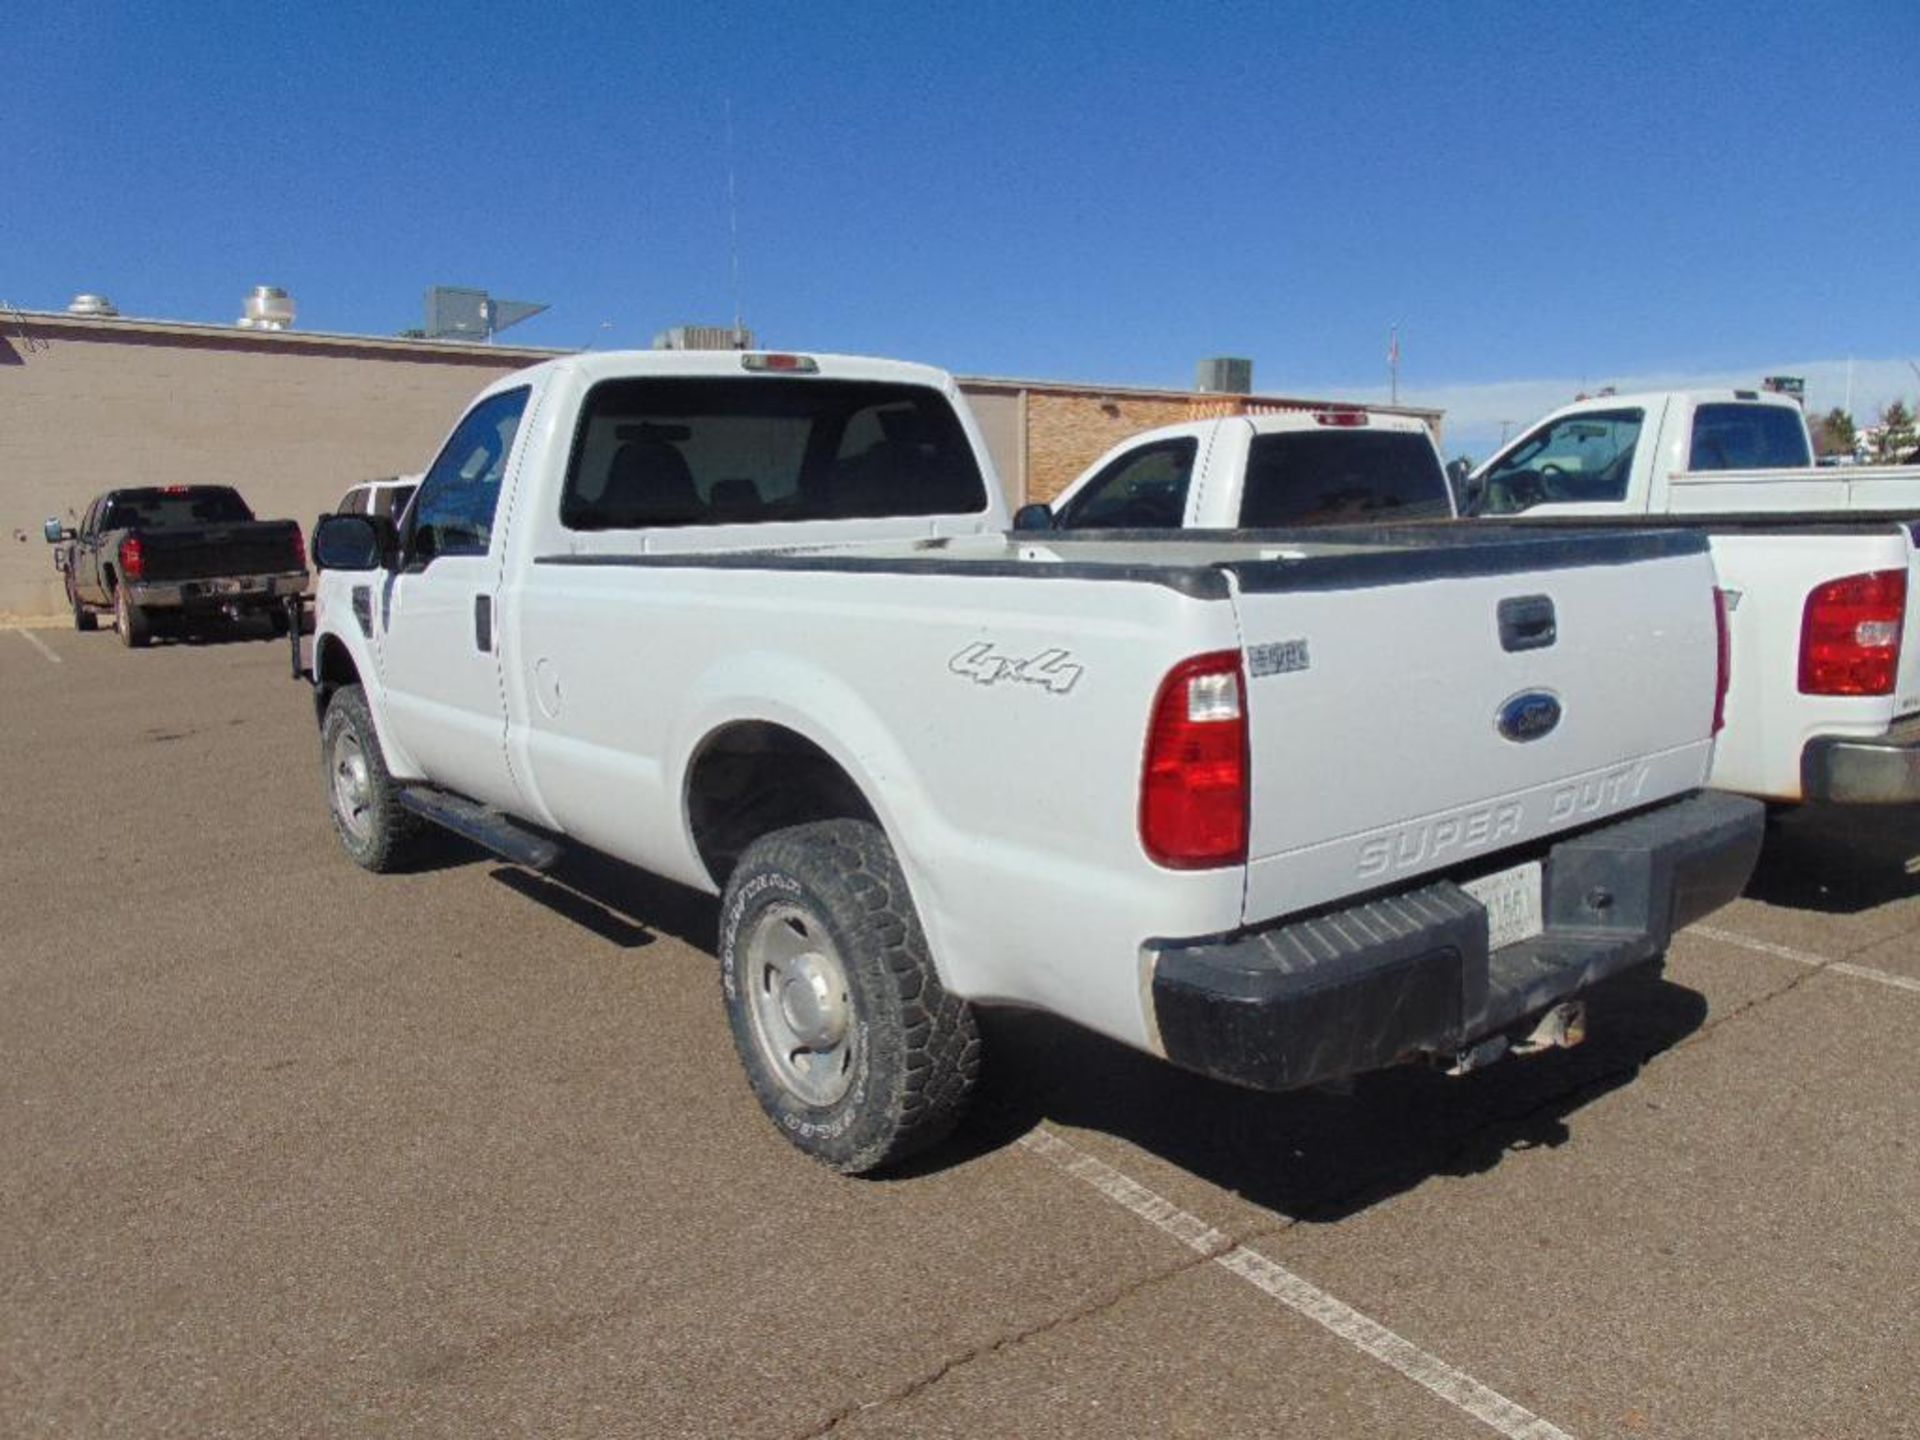 2008 Ford F250 4x4 Pickup s/n 1ftnf21568ed86285, v8 gas eng, auto trans, od reads 117592 miles, - Image 2 of 3